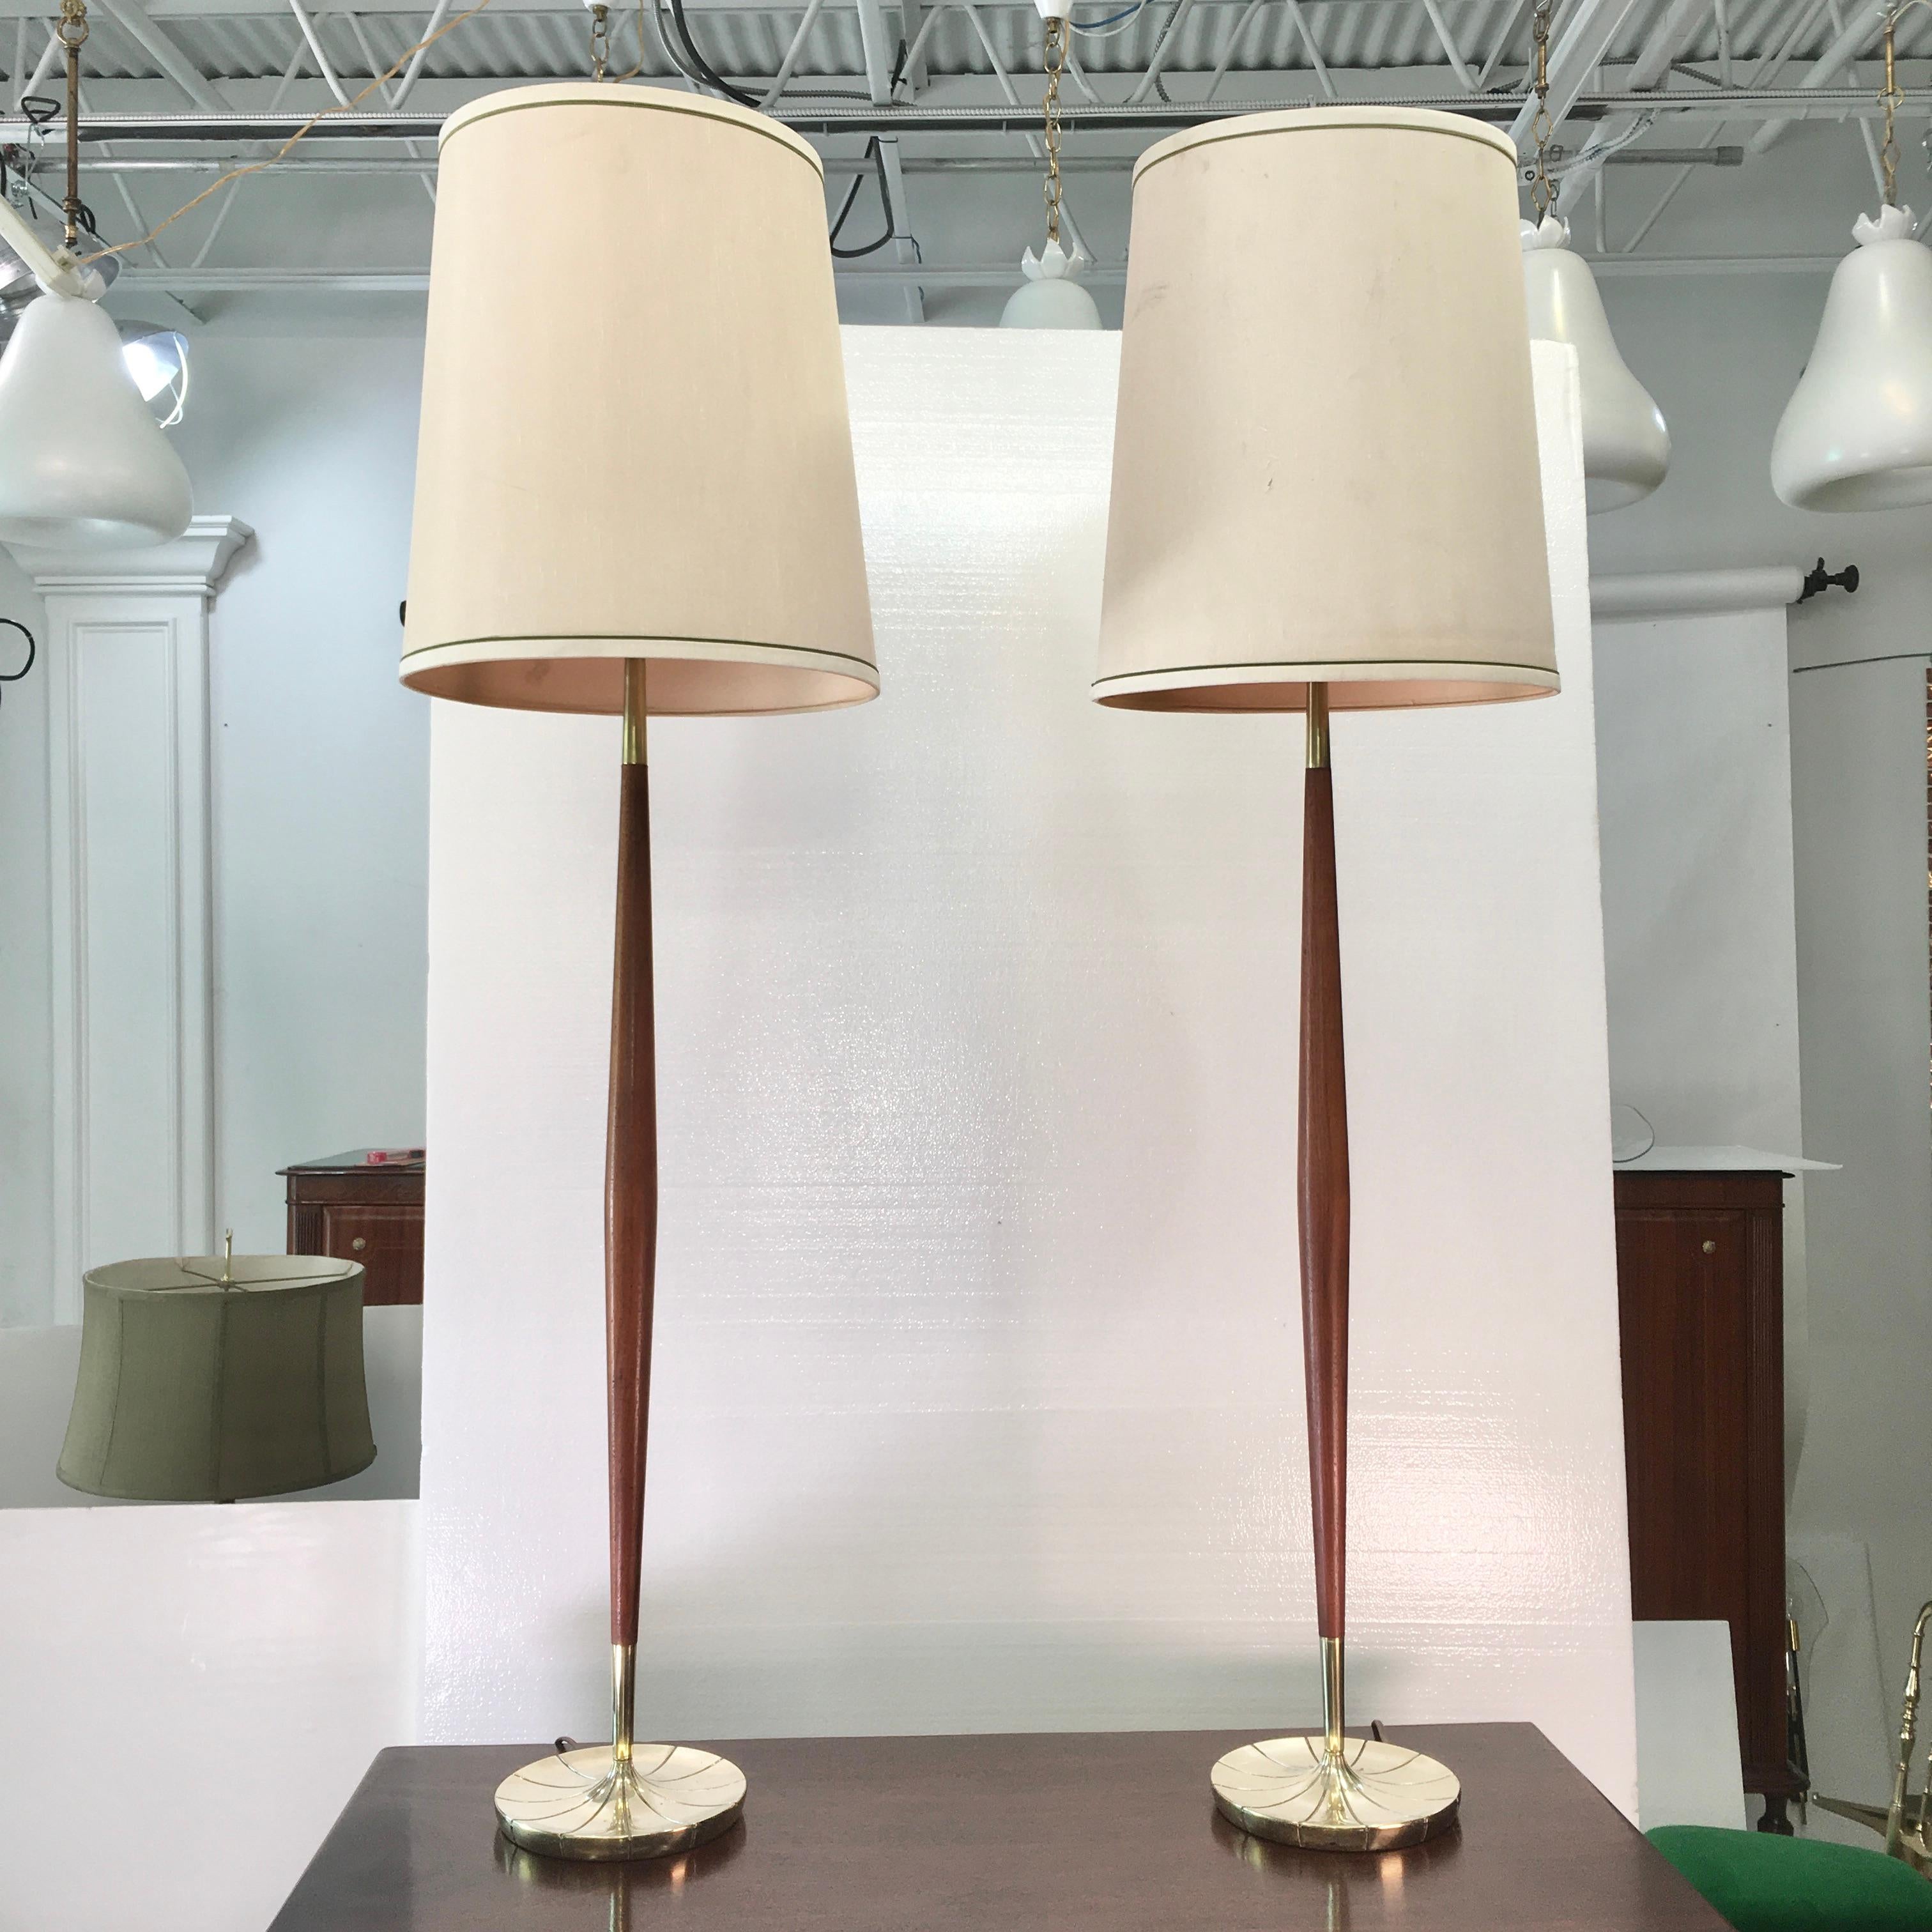 Handsome Mid-Century Modern pair of Stiffel lamps with elongated tapered walnut stems on brass finished cast aluminum petal form bases. These can be used either as petite floor lamps or extra tall table lamps. Each takes a single standard size